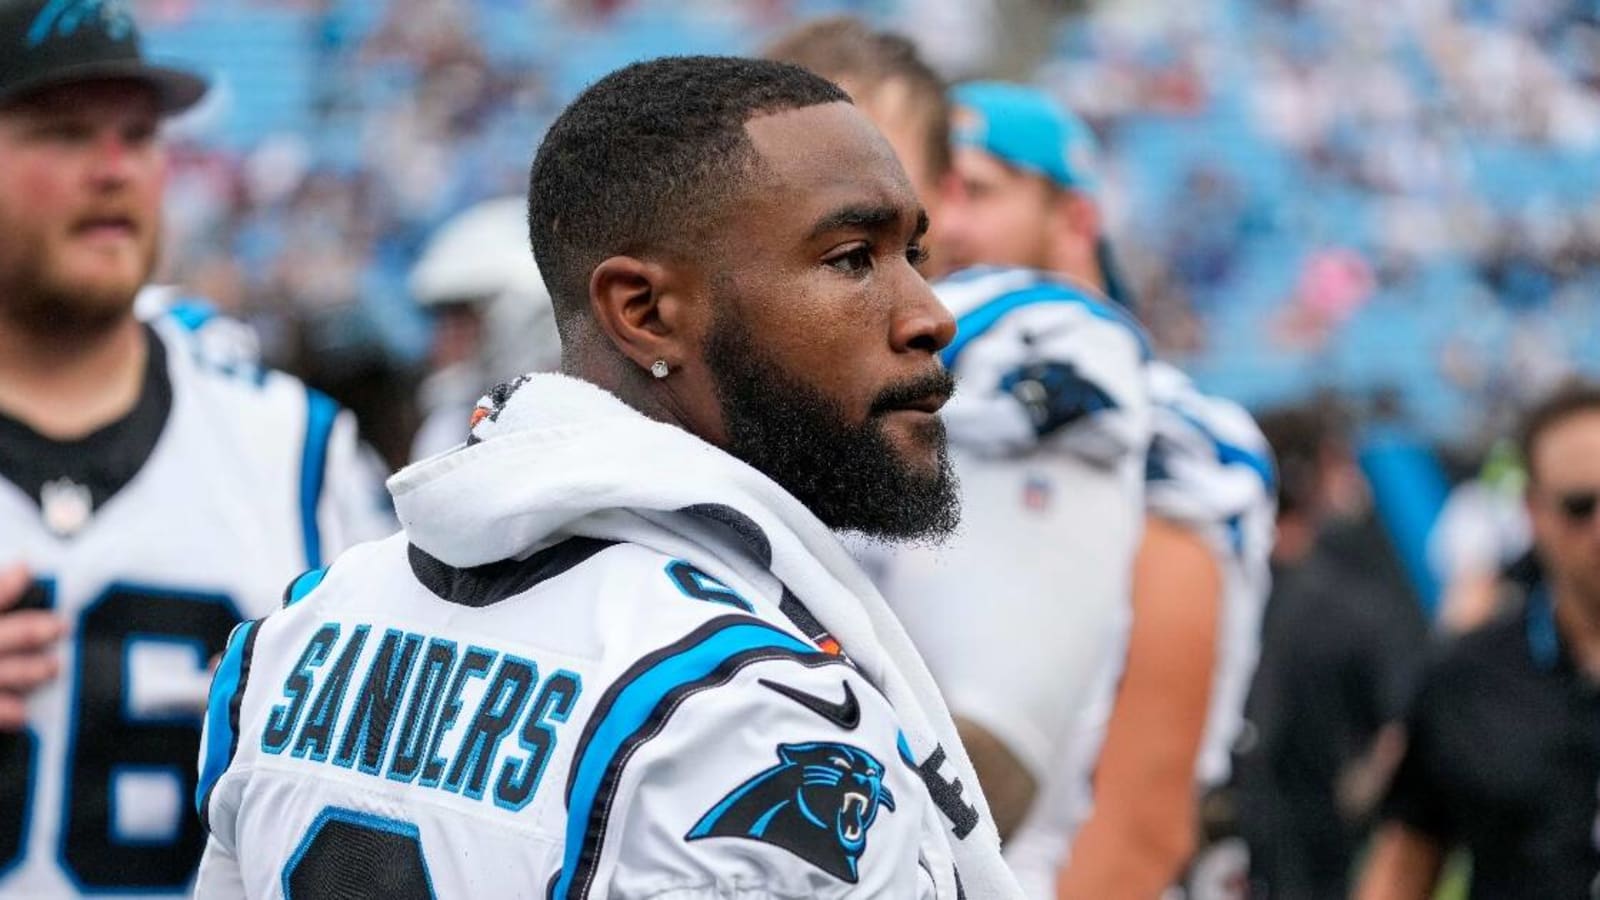 Miles Sanders responds to Panthers being booed by home crowd: ‘It’s not cool’